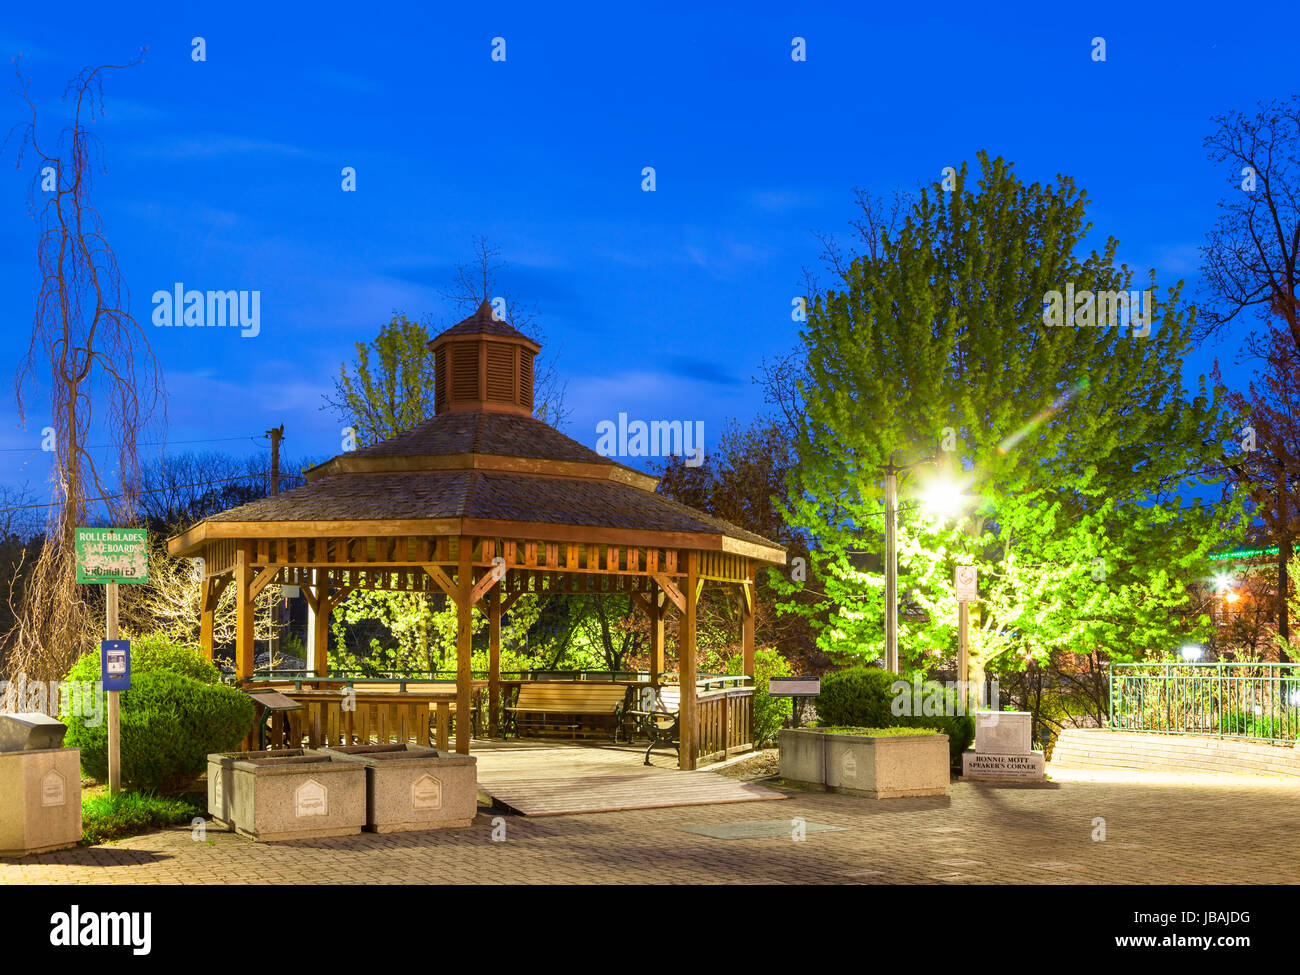 A gazebo at Heritage Park or Heritage Court in downtown Ingersoll, Oxford County, Ontario, Canada at dusk. Stock Photo